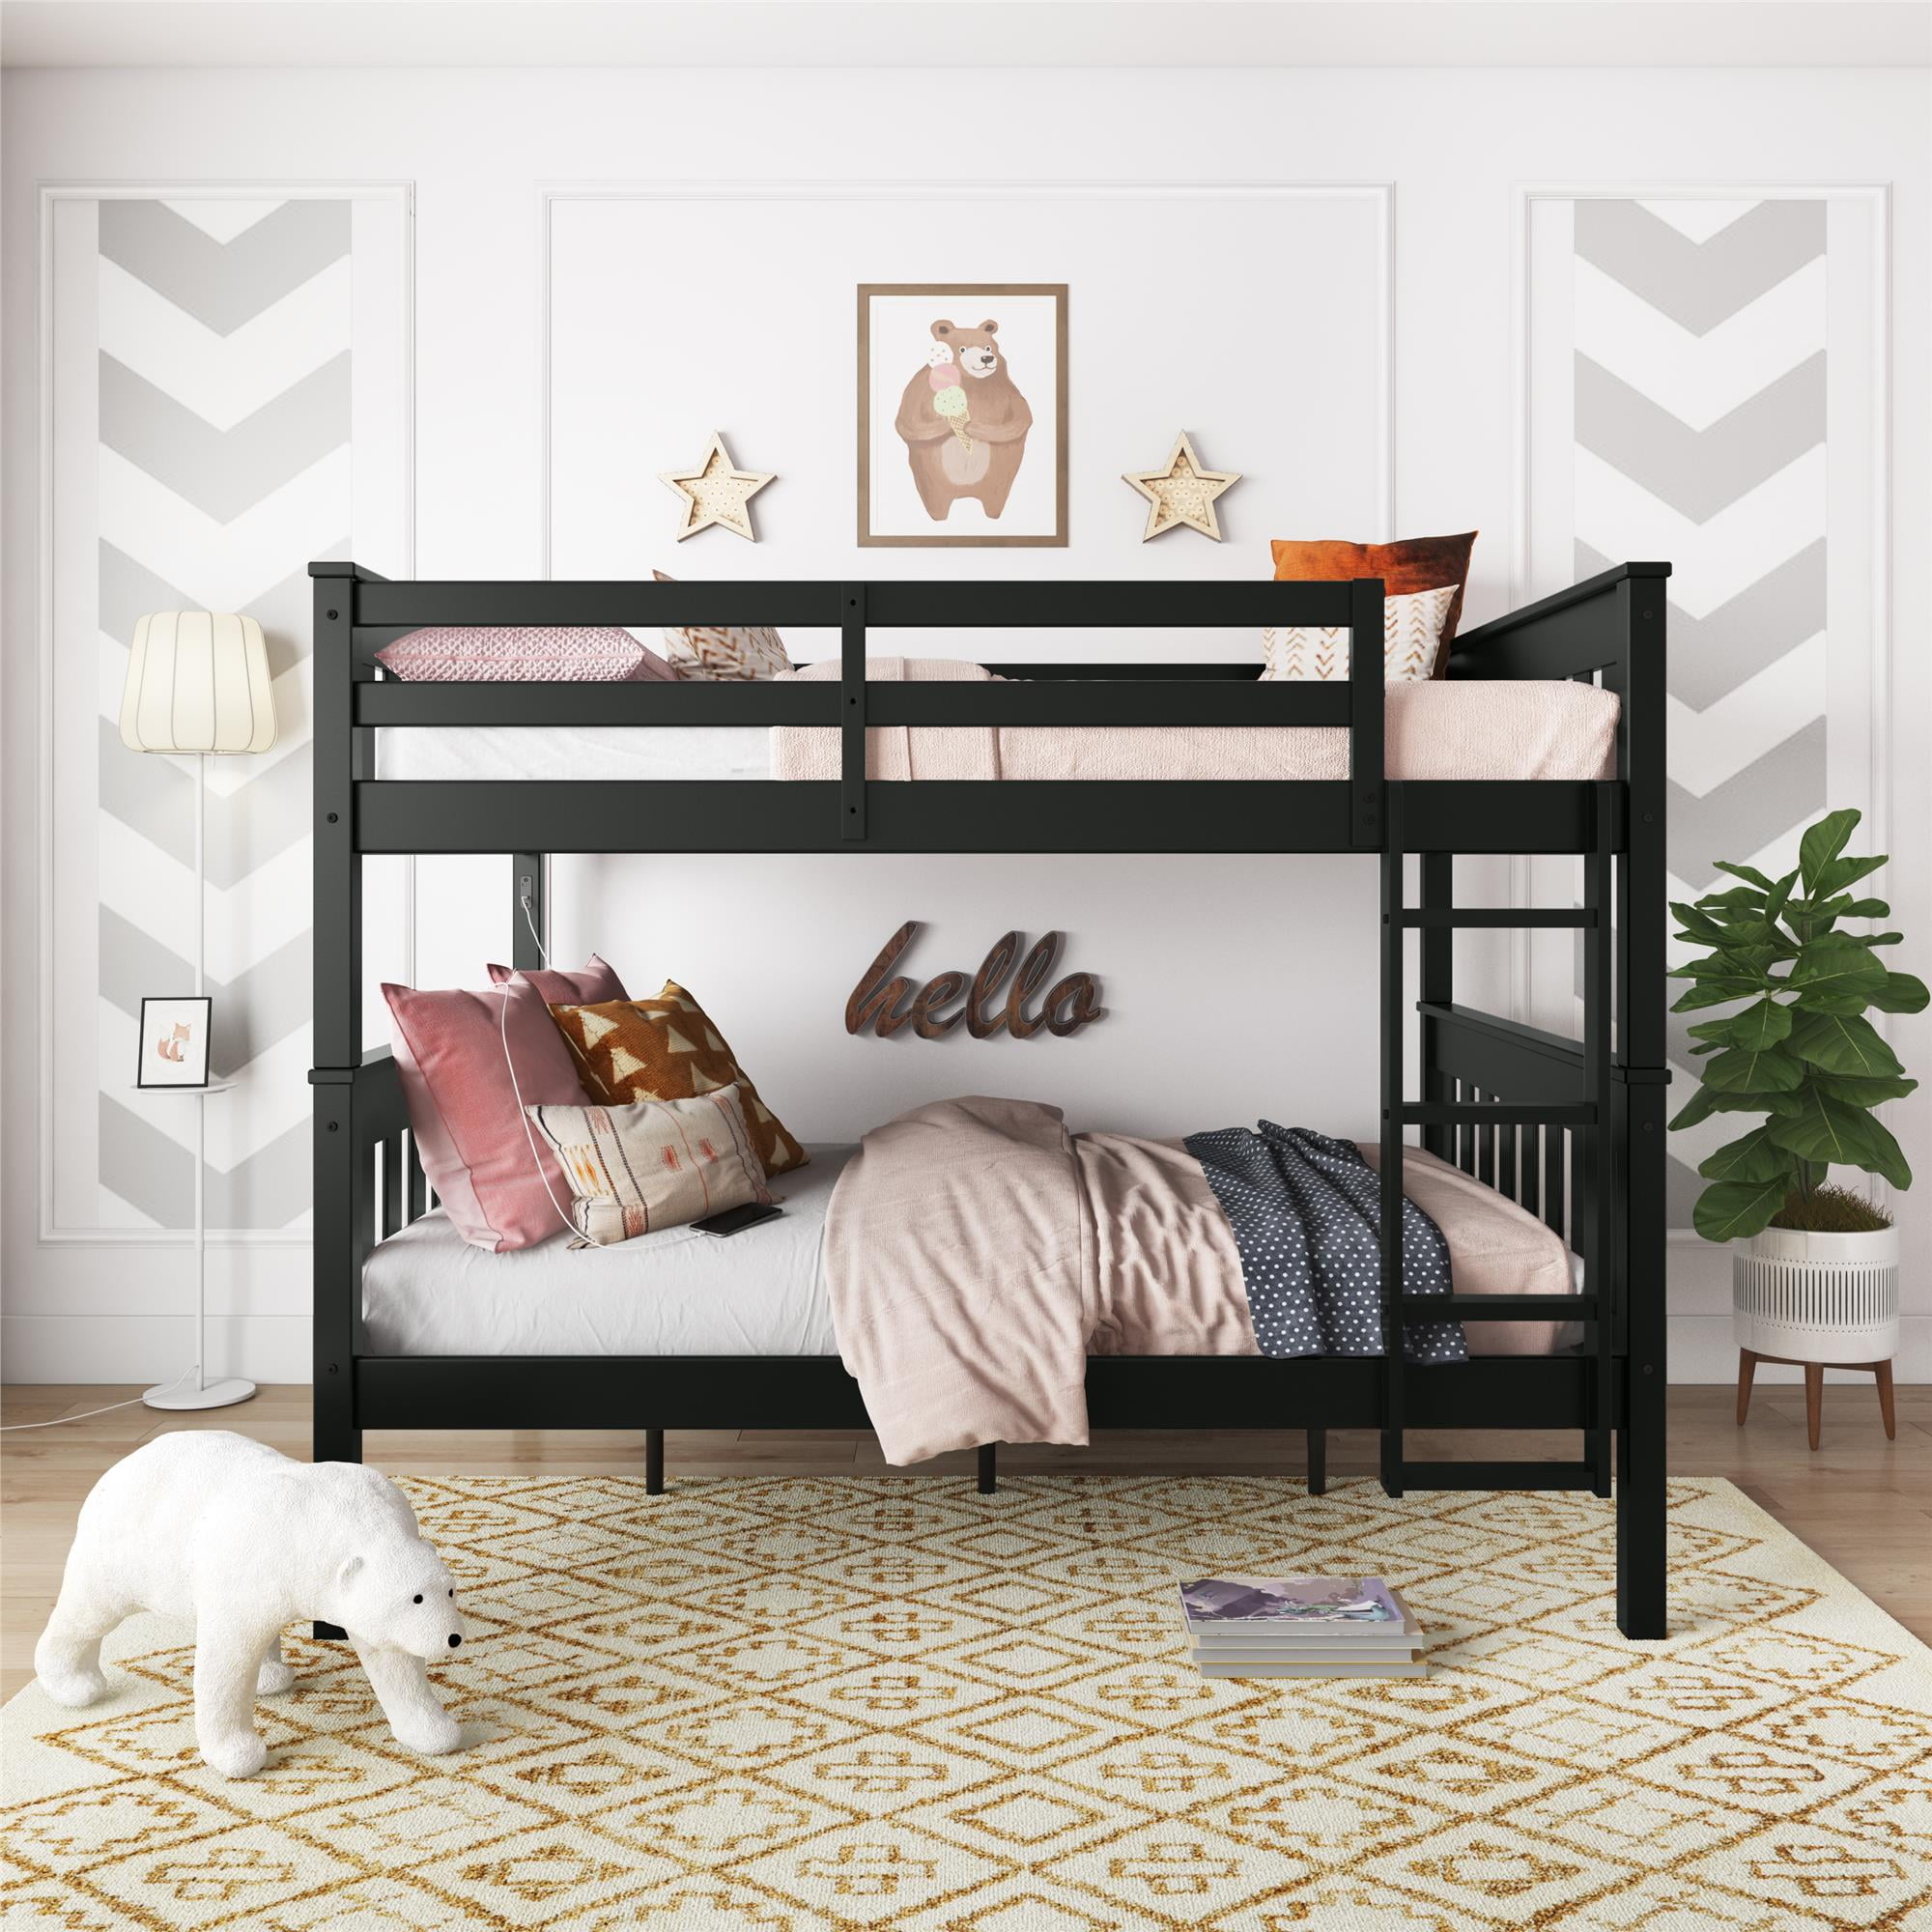 Bunk Beds For Big Lots, Simmons Tristan Bunk Bed Instructions